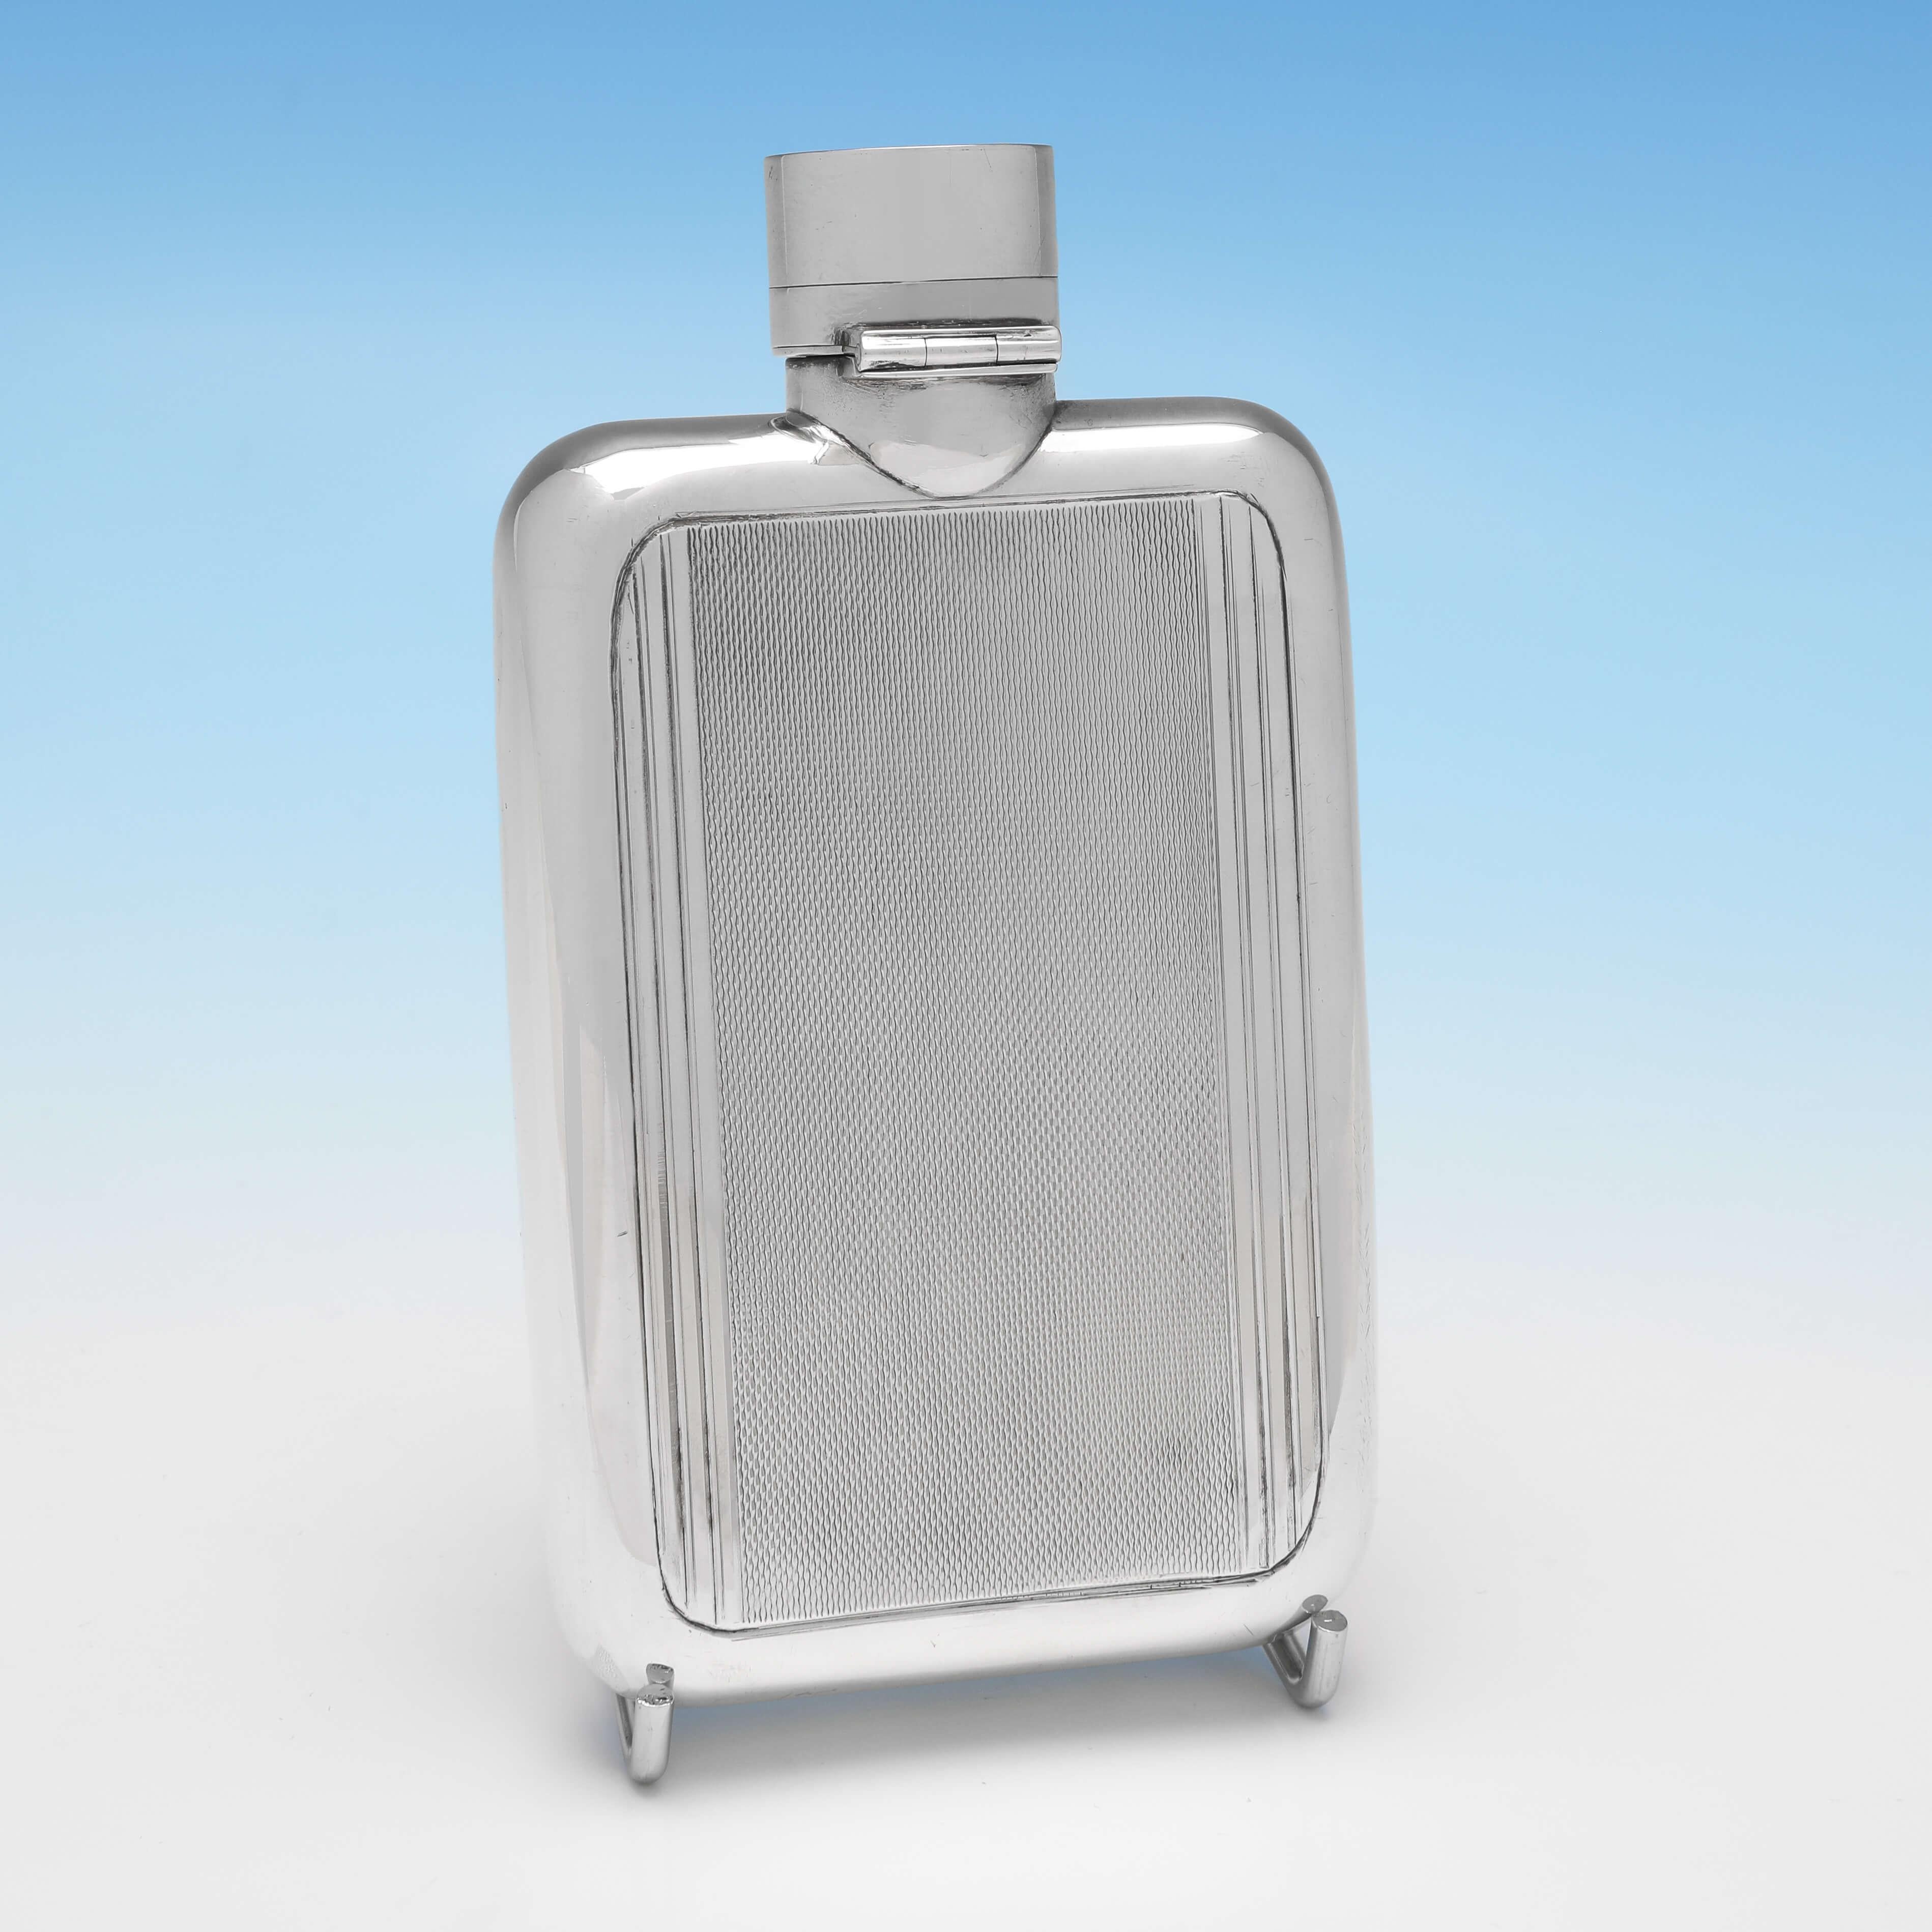 Hallmarked in London in 1947 by Mappin & Webb, this very handsome, Sterling Silver hip flask, is in the Art Deco taste, and features engine turned engraving and a bayonet cap. The hip flask measures 5.25